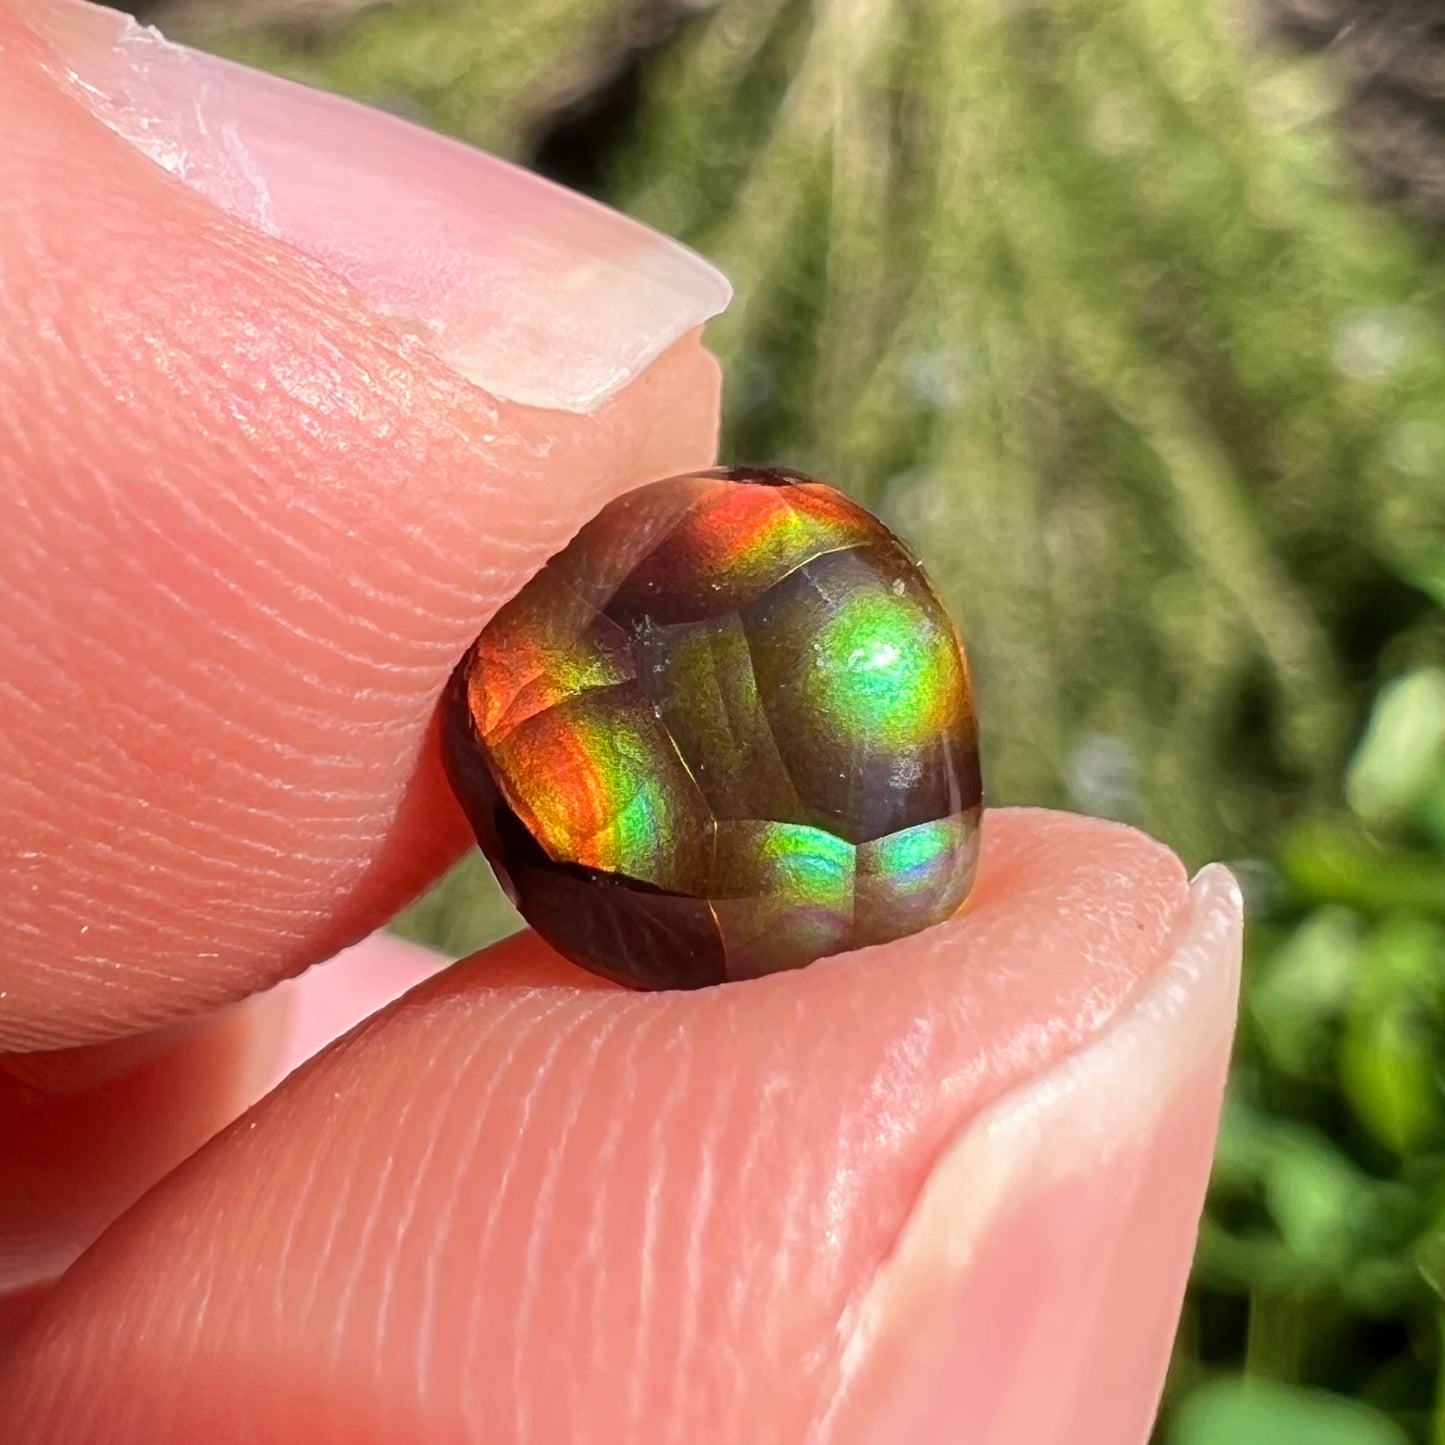 A loose, cabochon cut Mexican fire agate gemstone.  The stone is small and exceptionally bright in the sunlight.